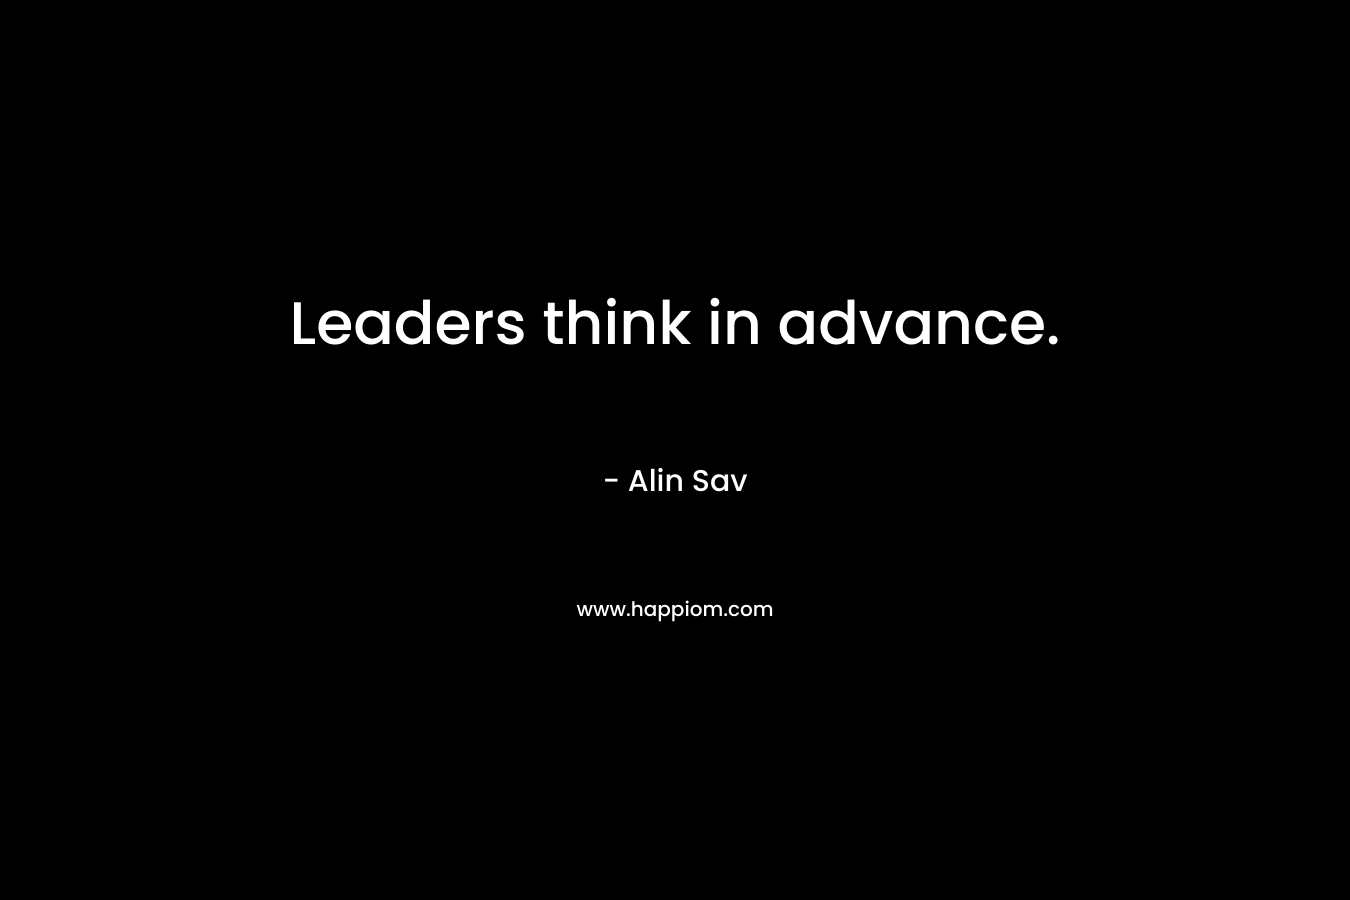 Leaders think in advance.